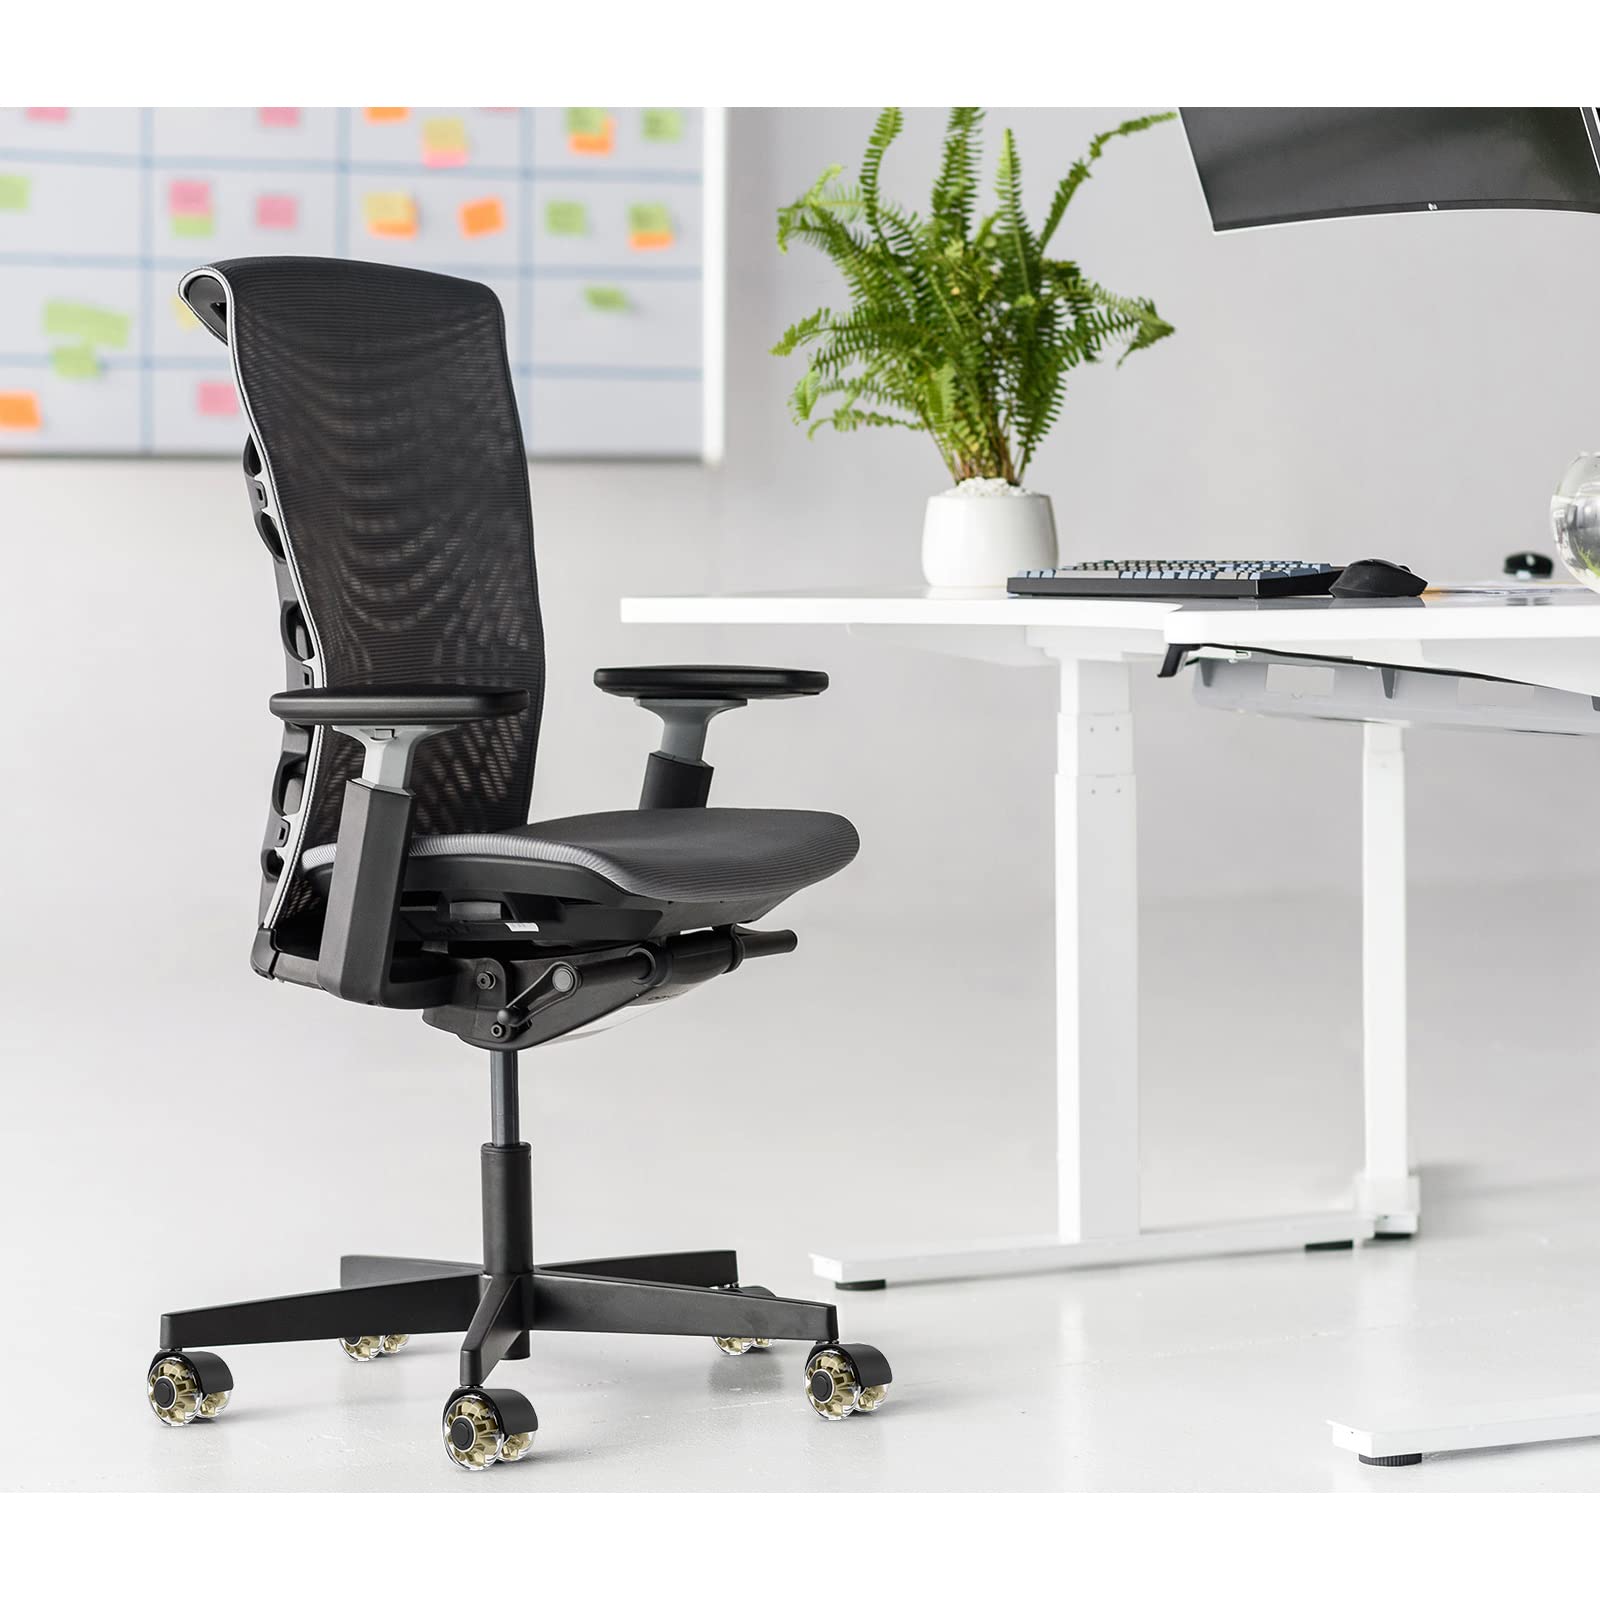 Buying and renting office chairs in Israel